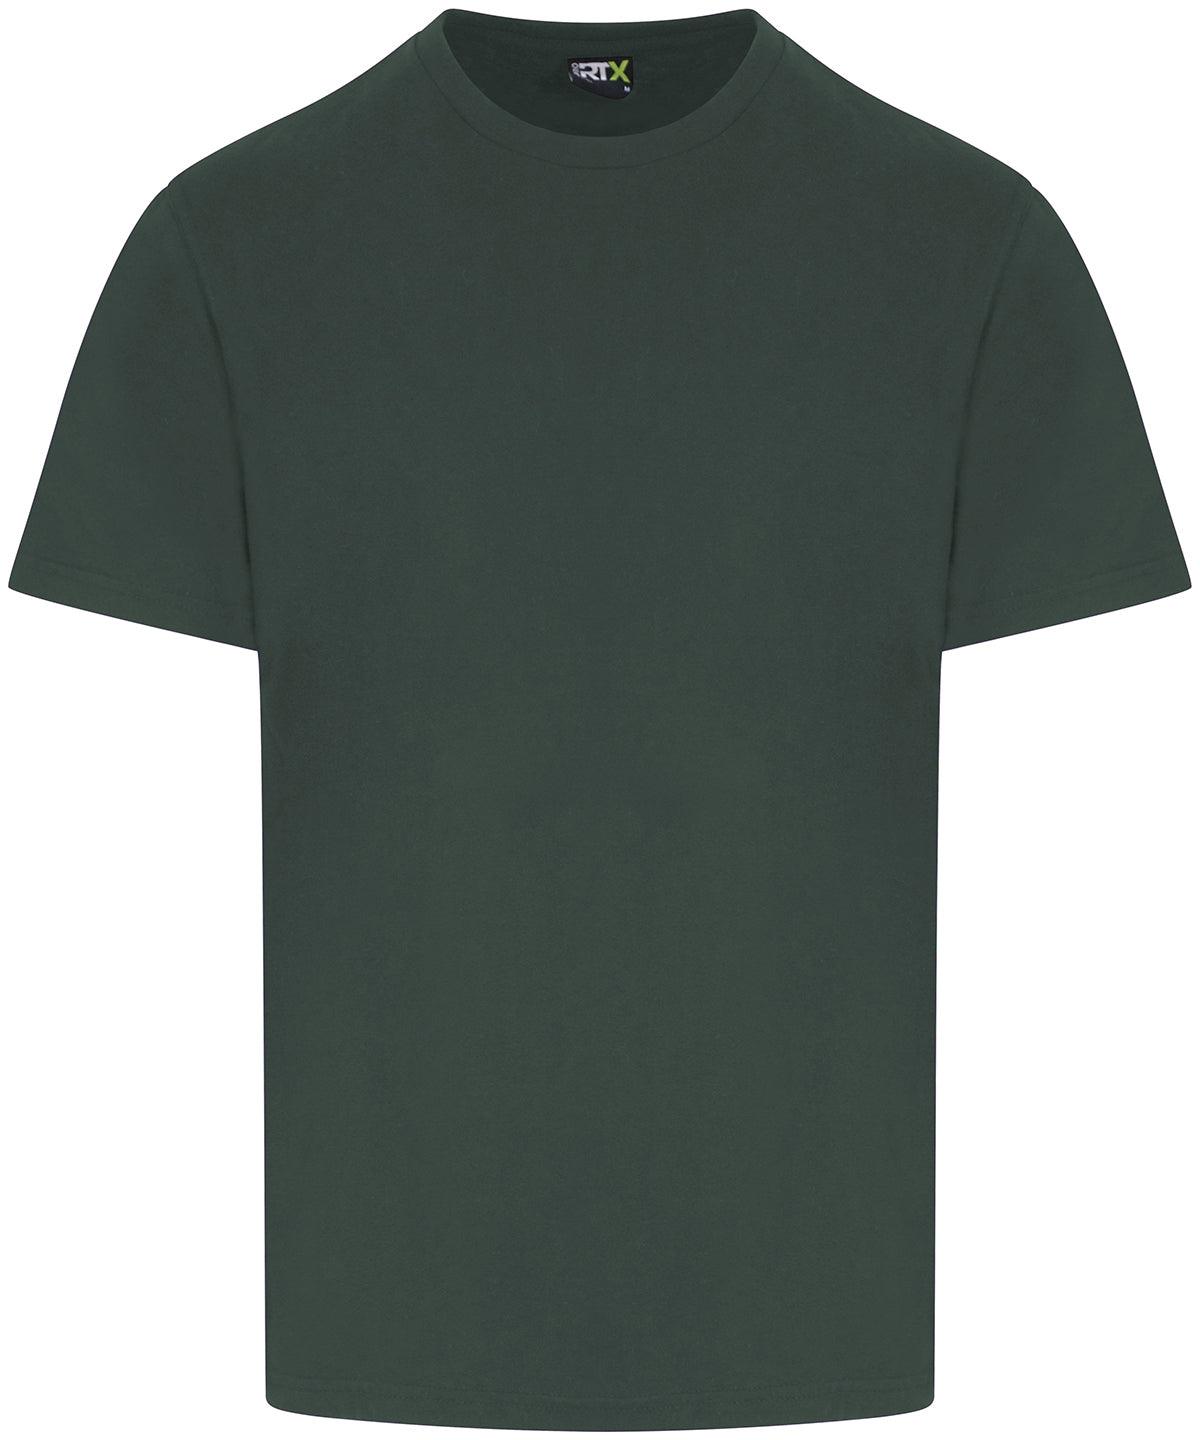 Bottle Green - Pro t-shirt T-Shirts ProRTX 2022 Spring Edit, Back to Business, Must Haves, New Colours for 2021, New Colours for 2023, New Sizes for 2021, Plus Sizes, T-Shirts & Vests, Workwear Schoolwear Centres